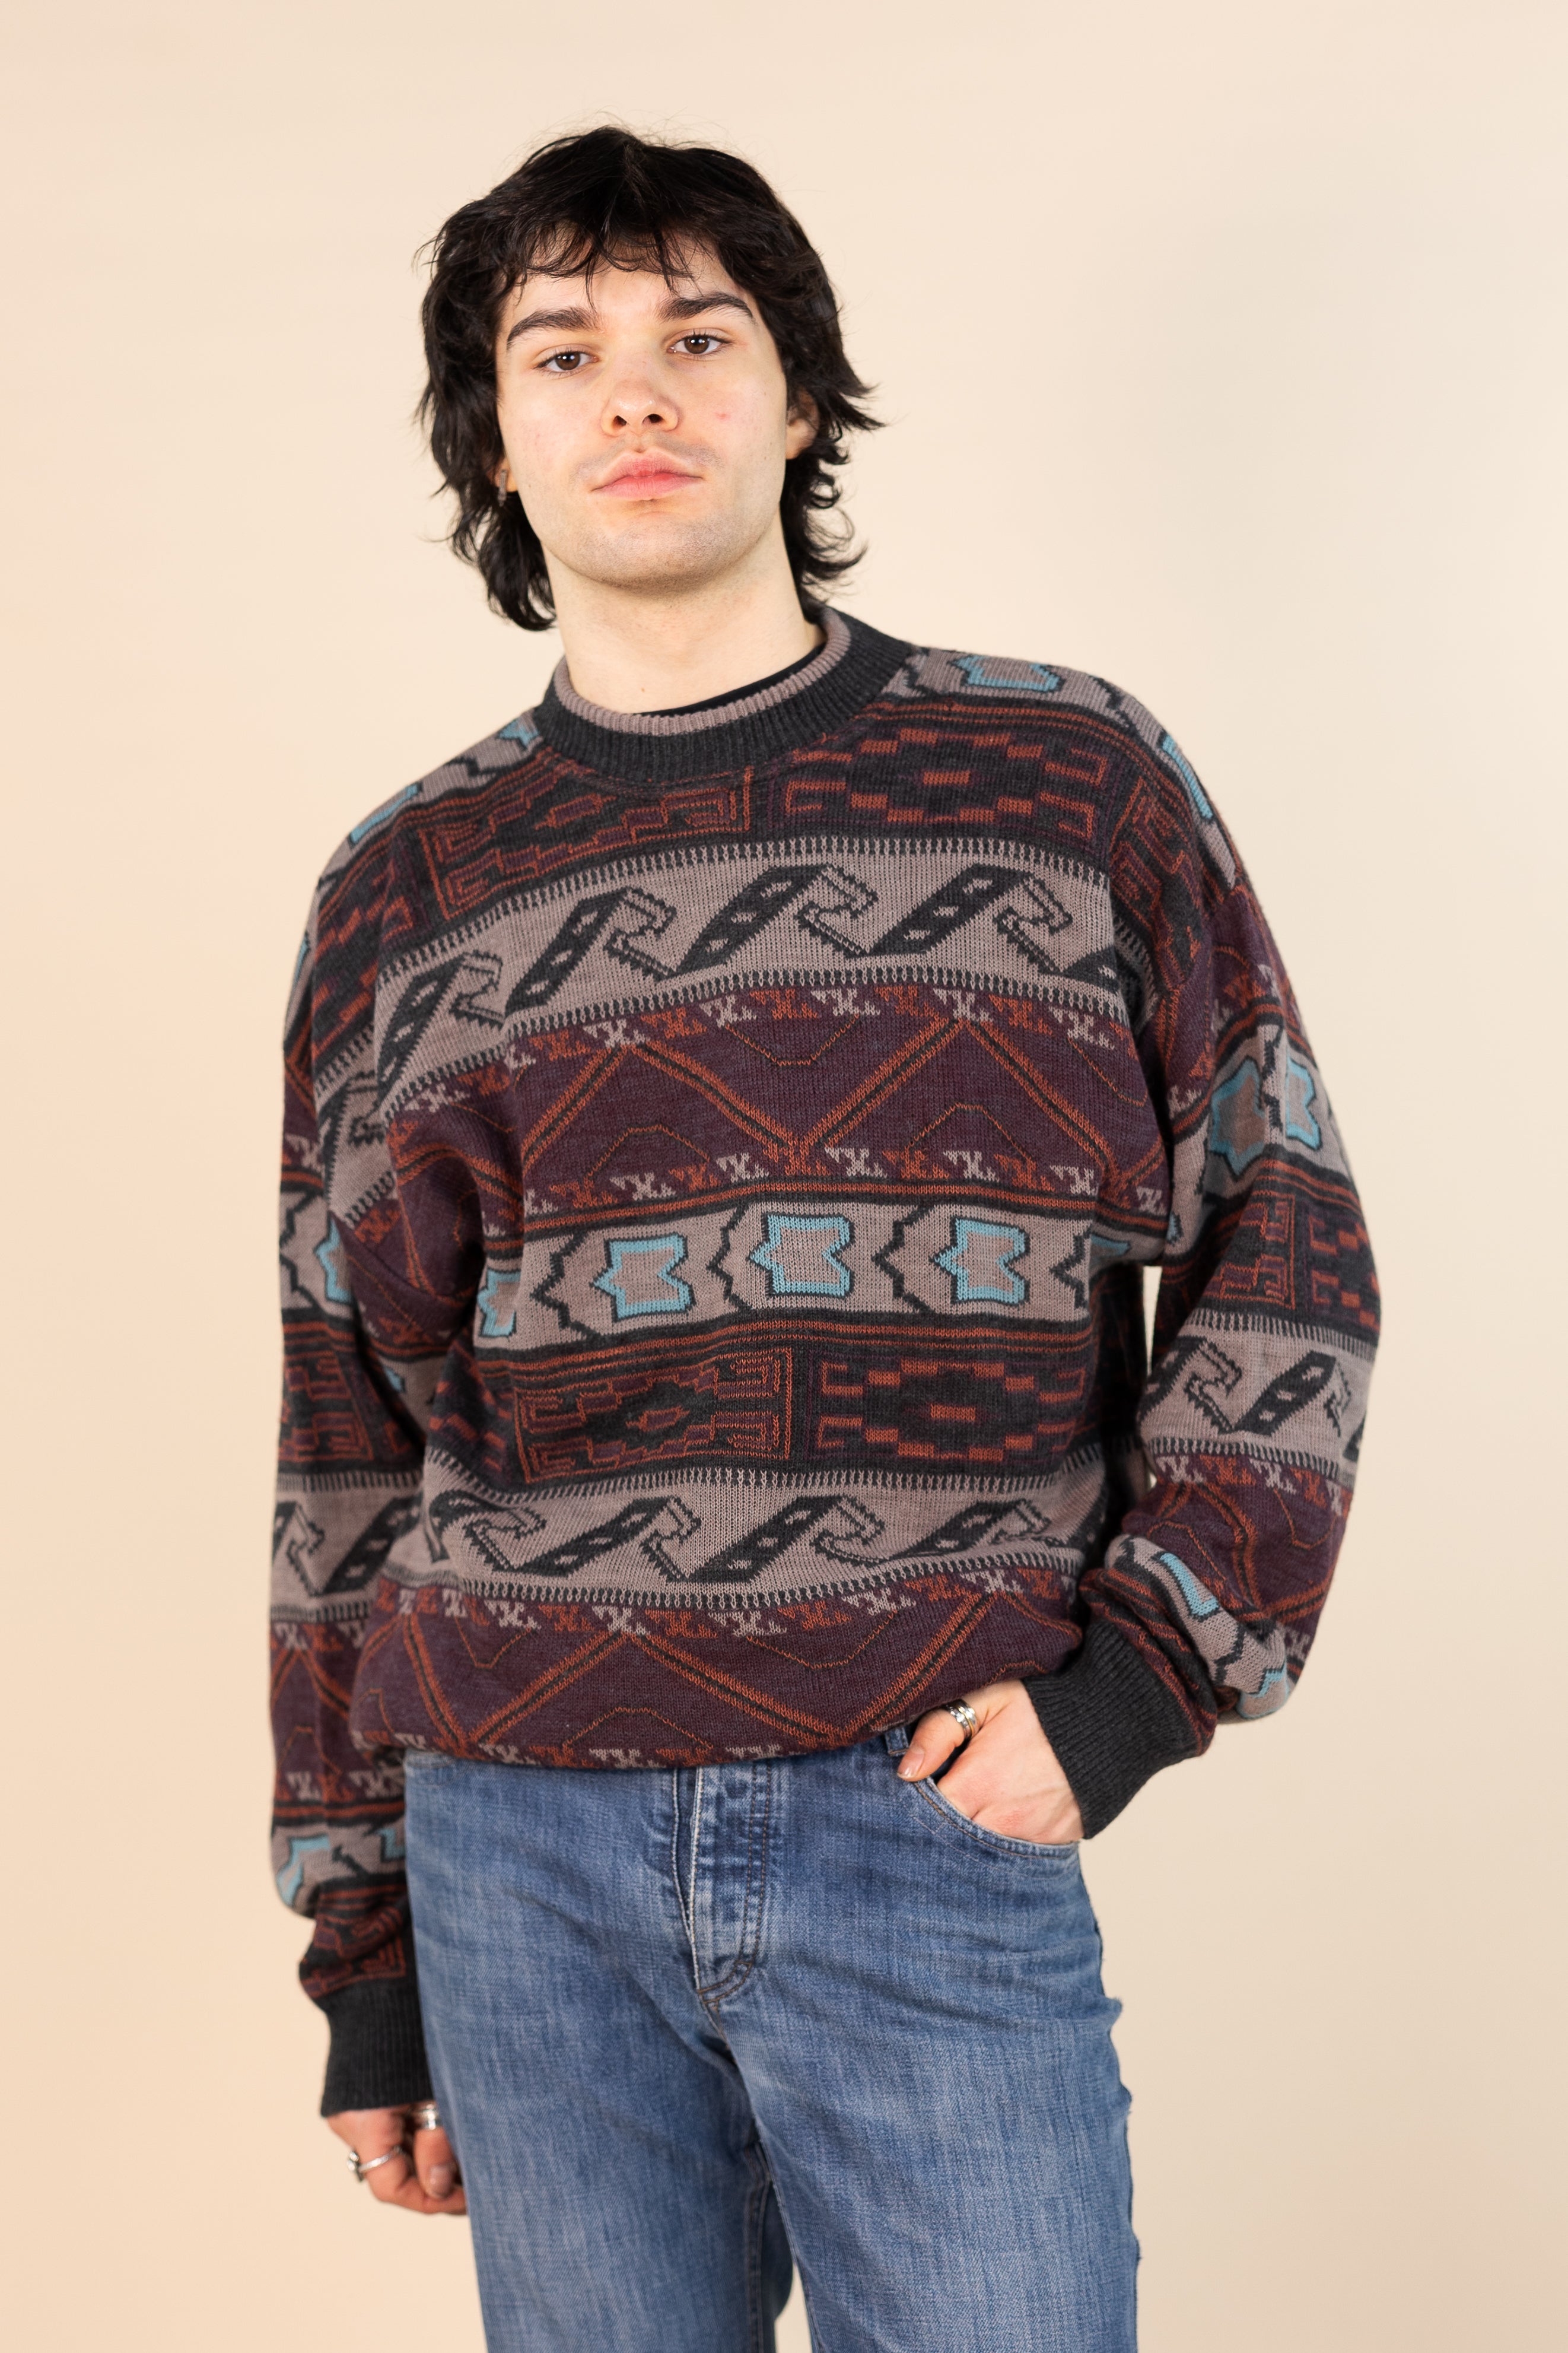 Men's Vintage Jumpers and Sweaters